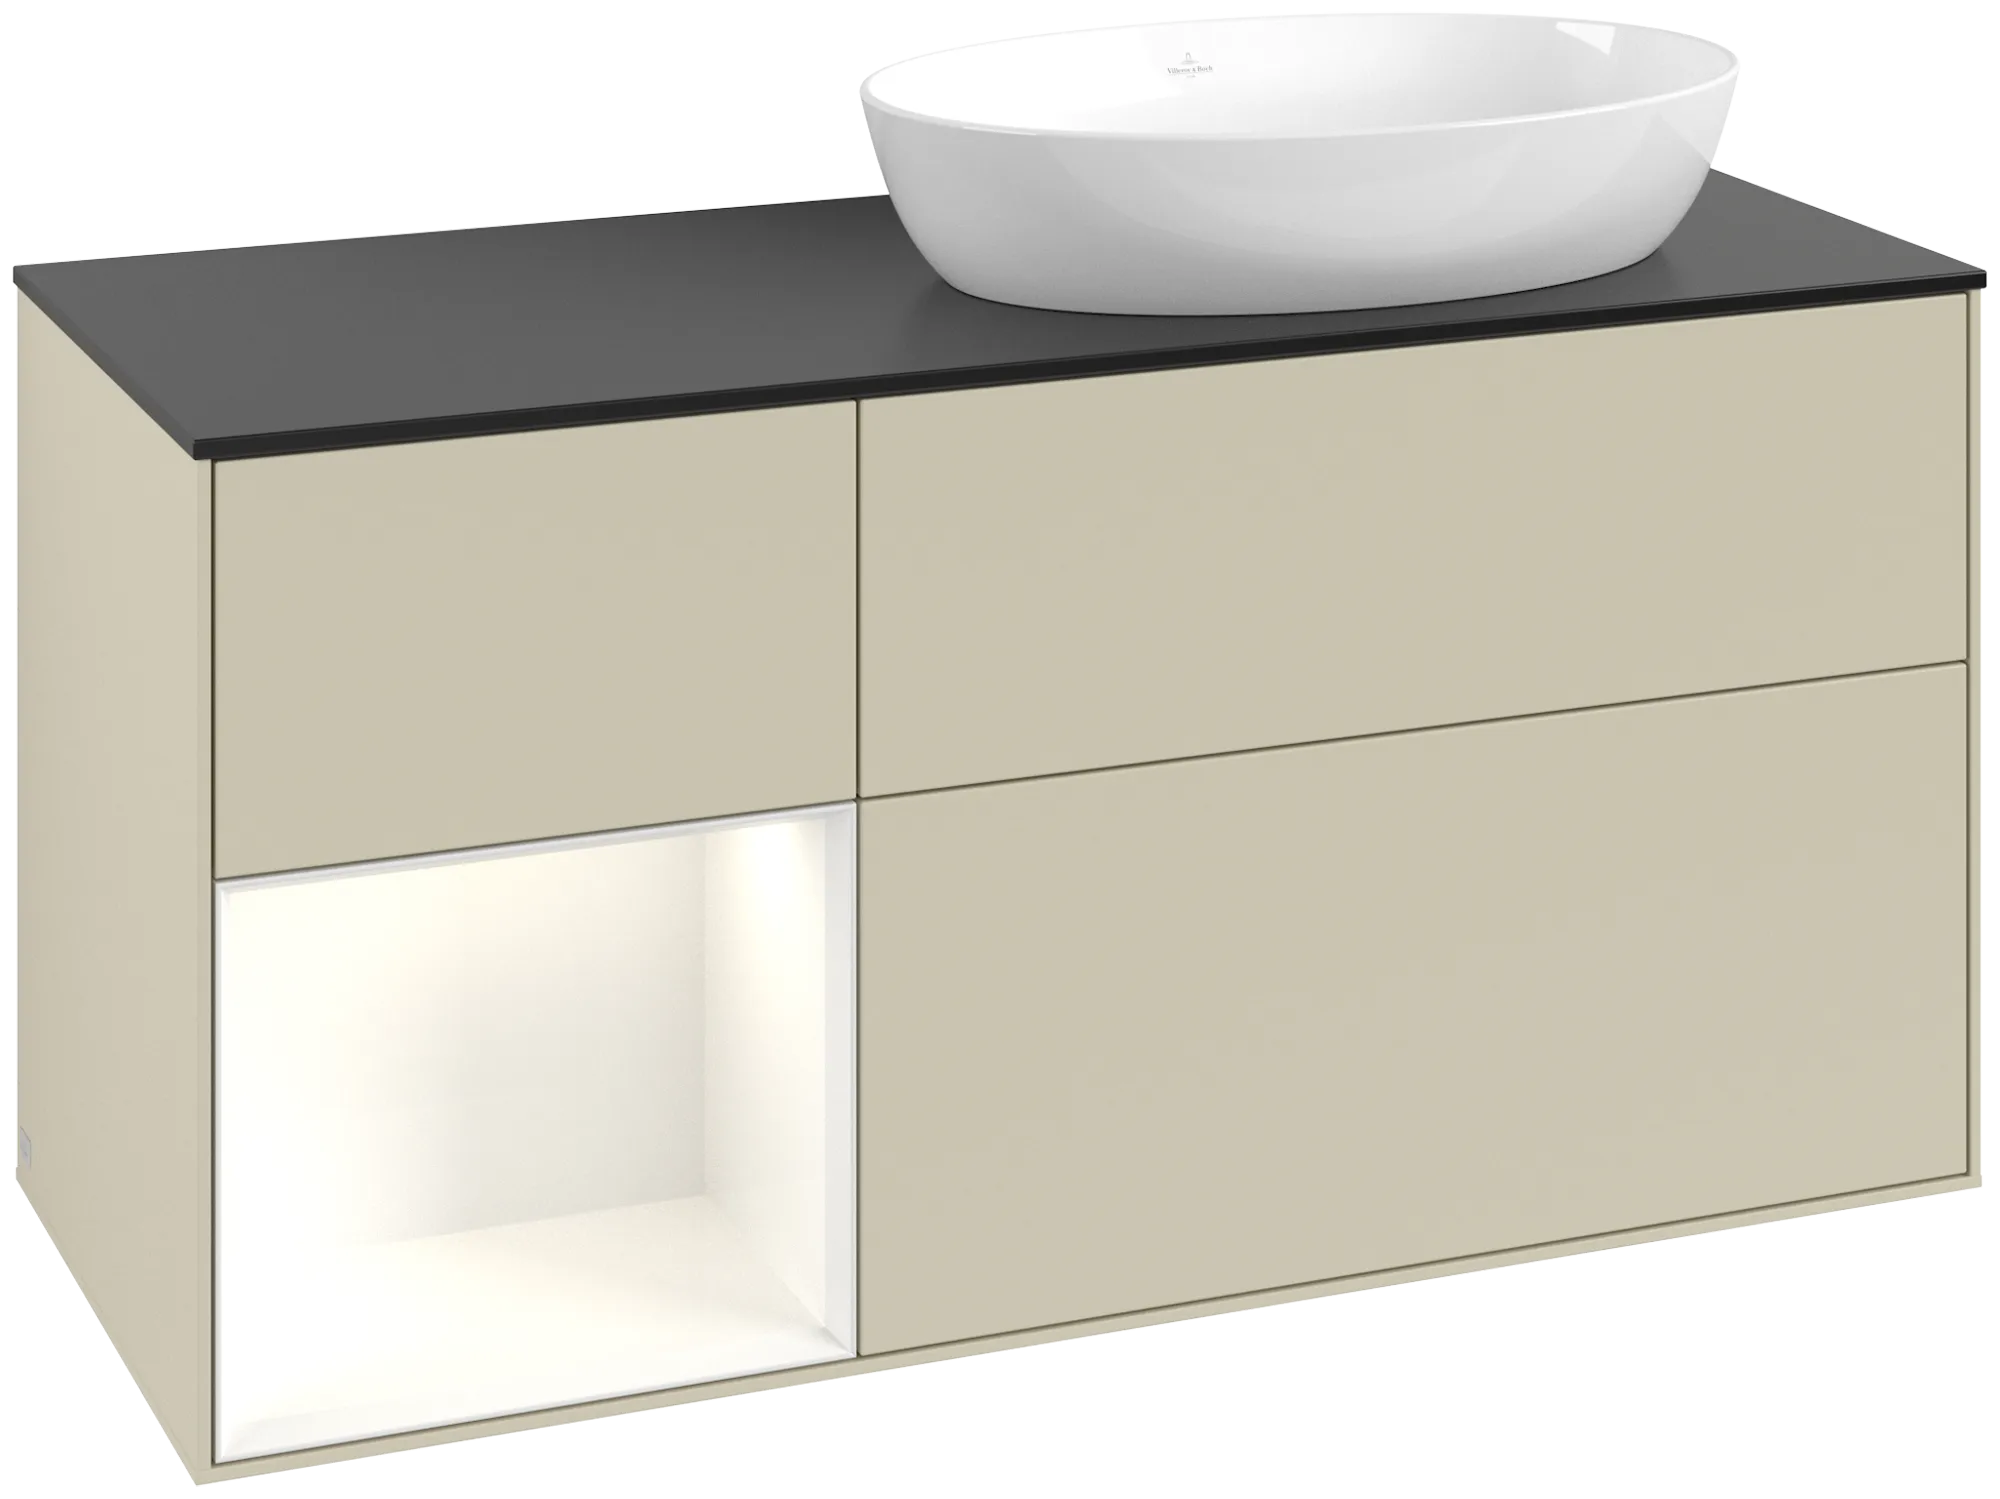 Picture of VILLEROY BOCH Finion Vanity unit, with lighting, 3 pull-out compartments, 1200 x 603 x 501 mm, Silk Grey Matt Lacquer / Glossy White Lacquer / Glass Black Matt #GA42GFHJ